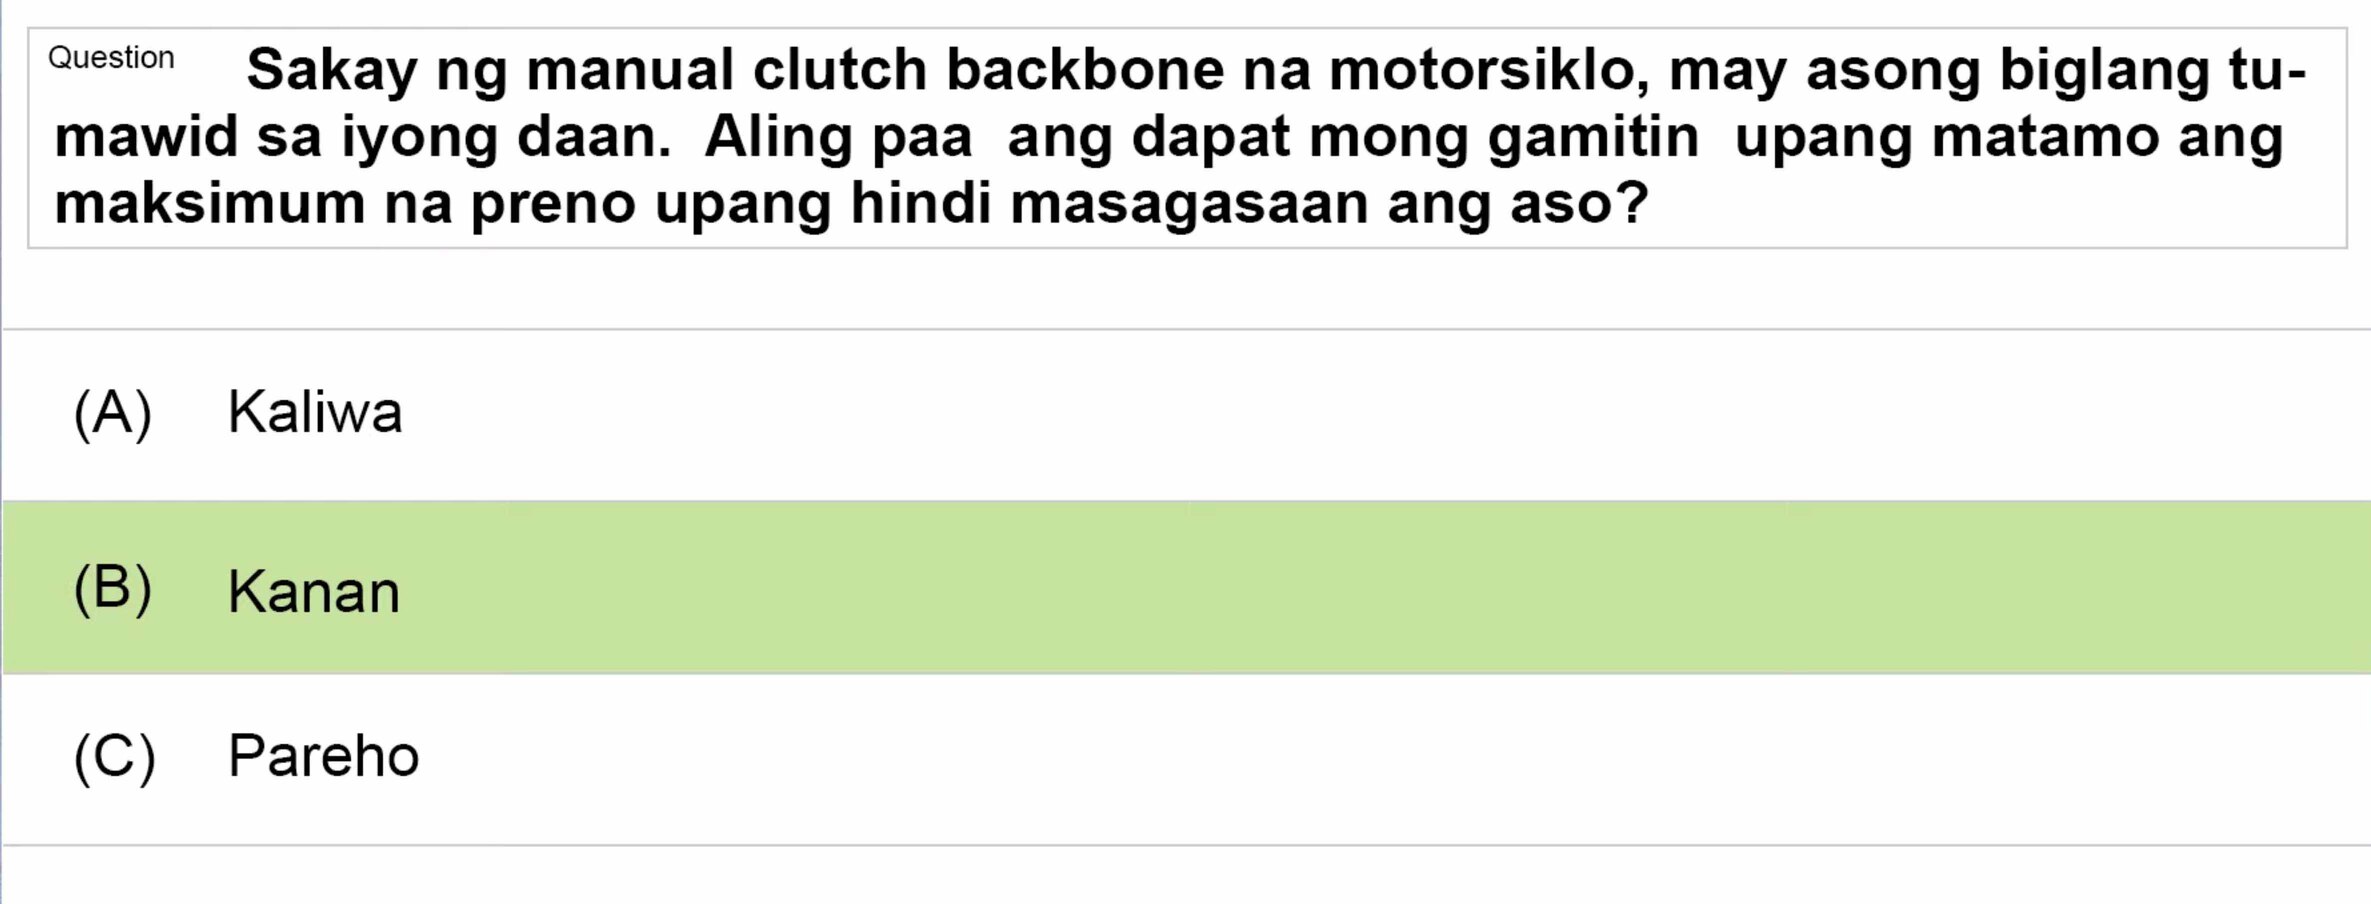 LTO Tagalog non professional exam reviewer motorcycle 1 (11)